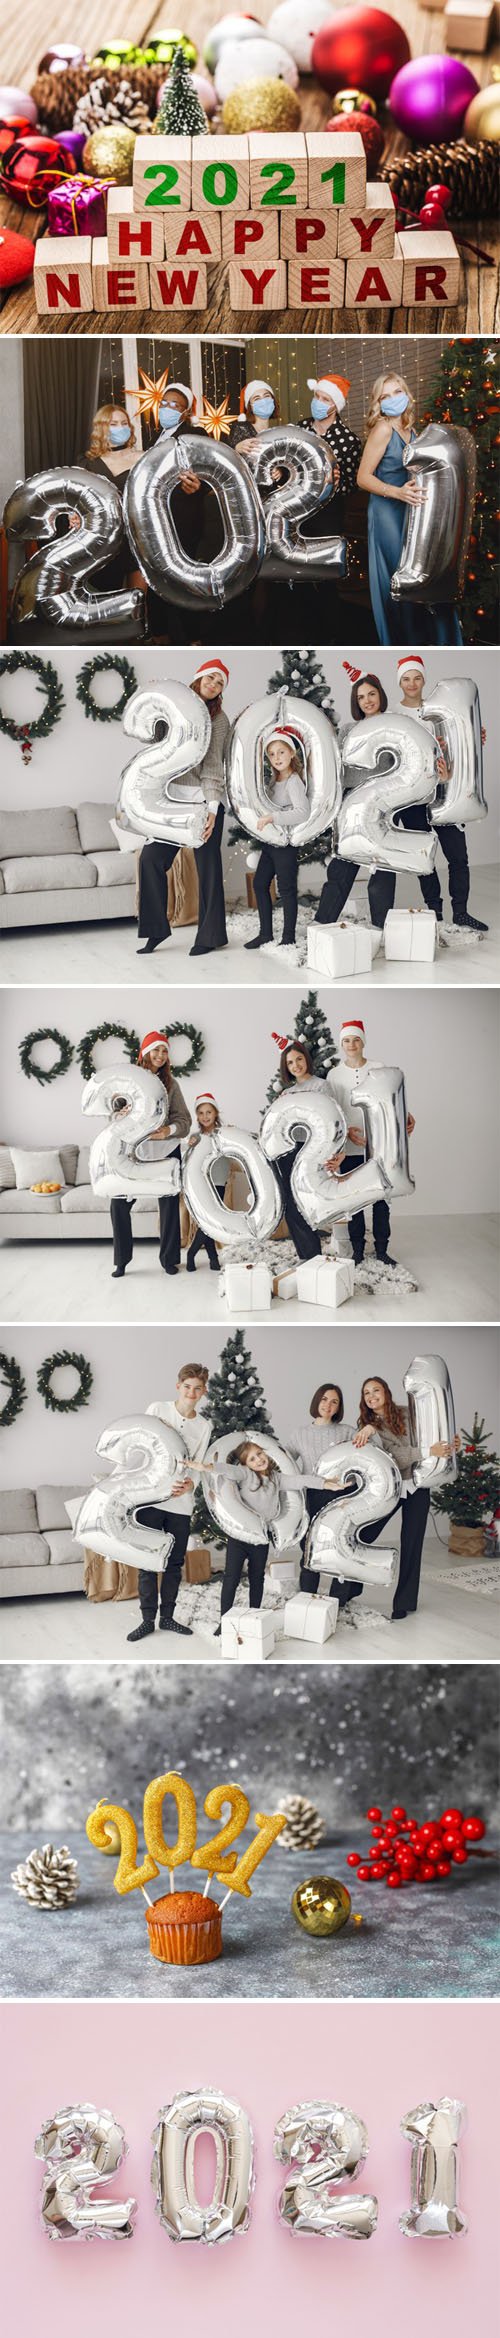 7 Happy New Year 2021 Photos Collection